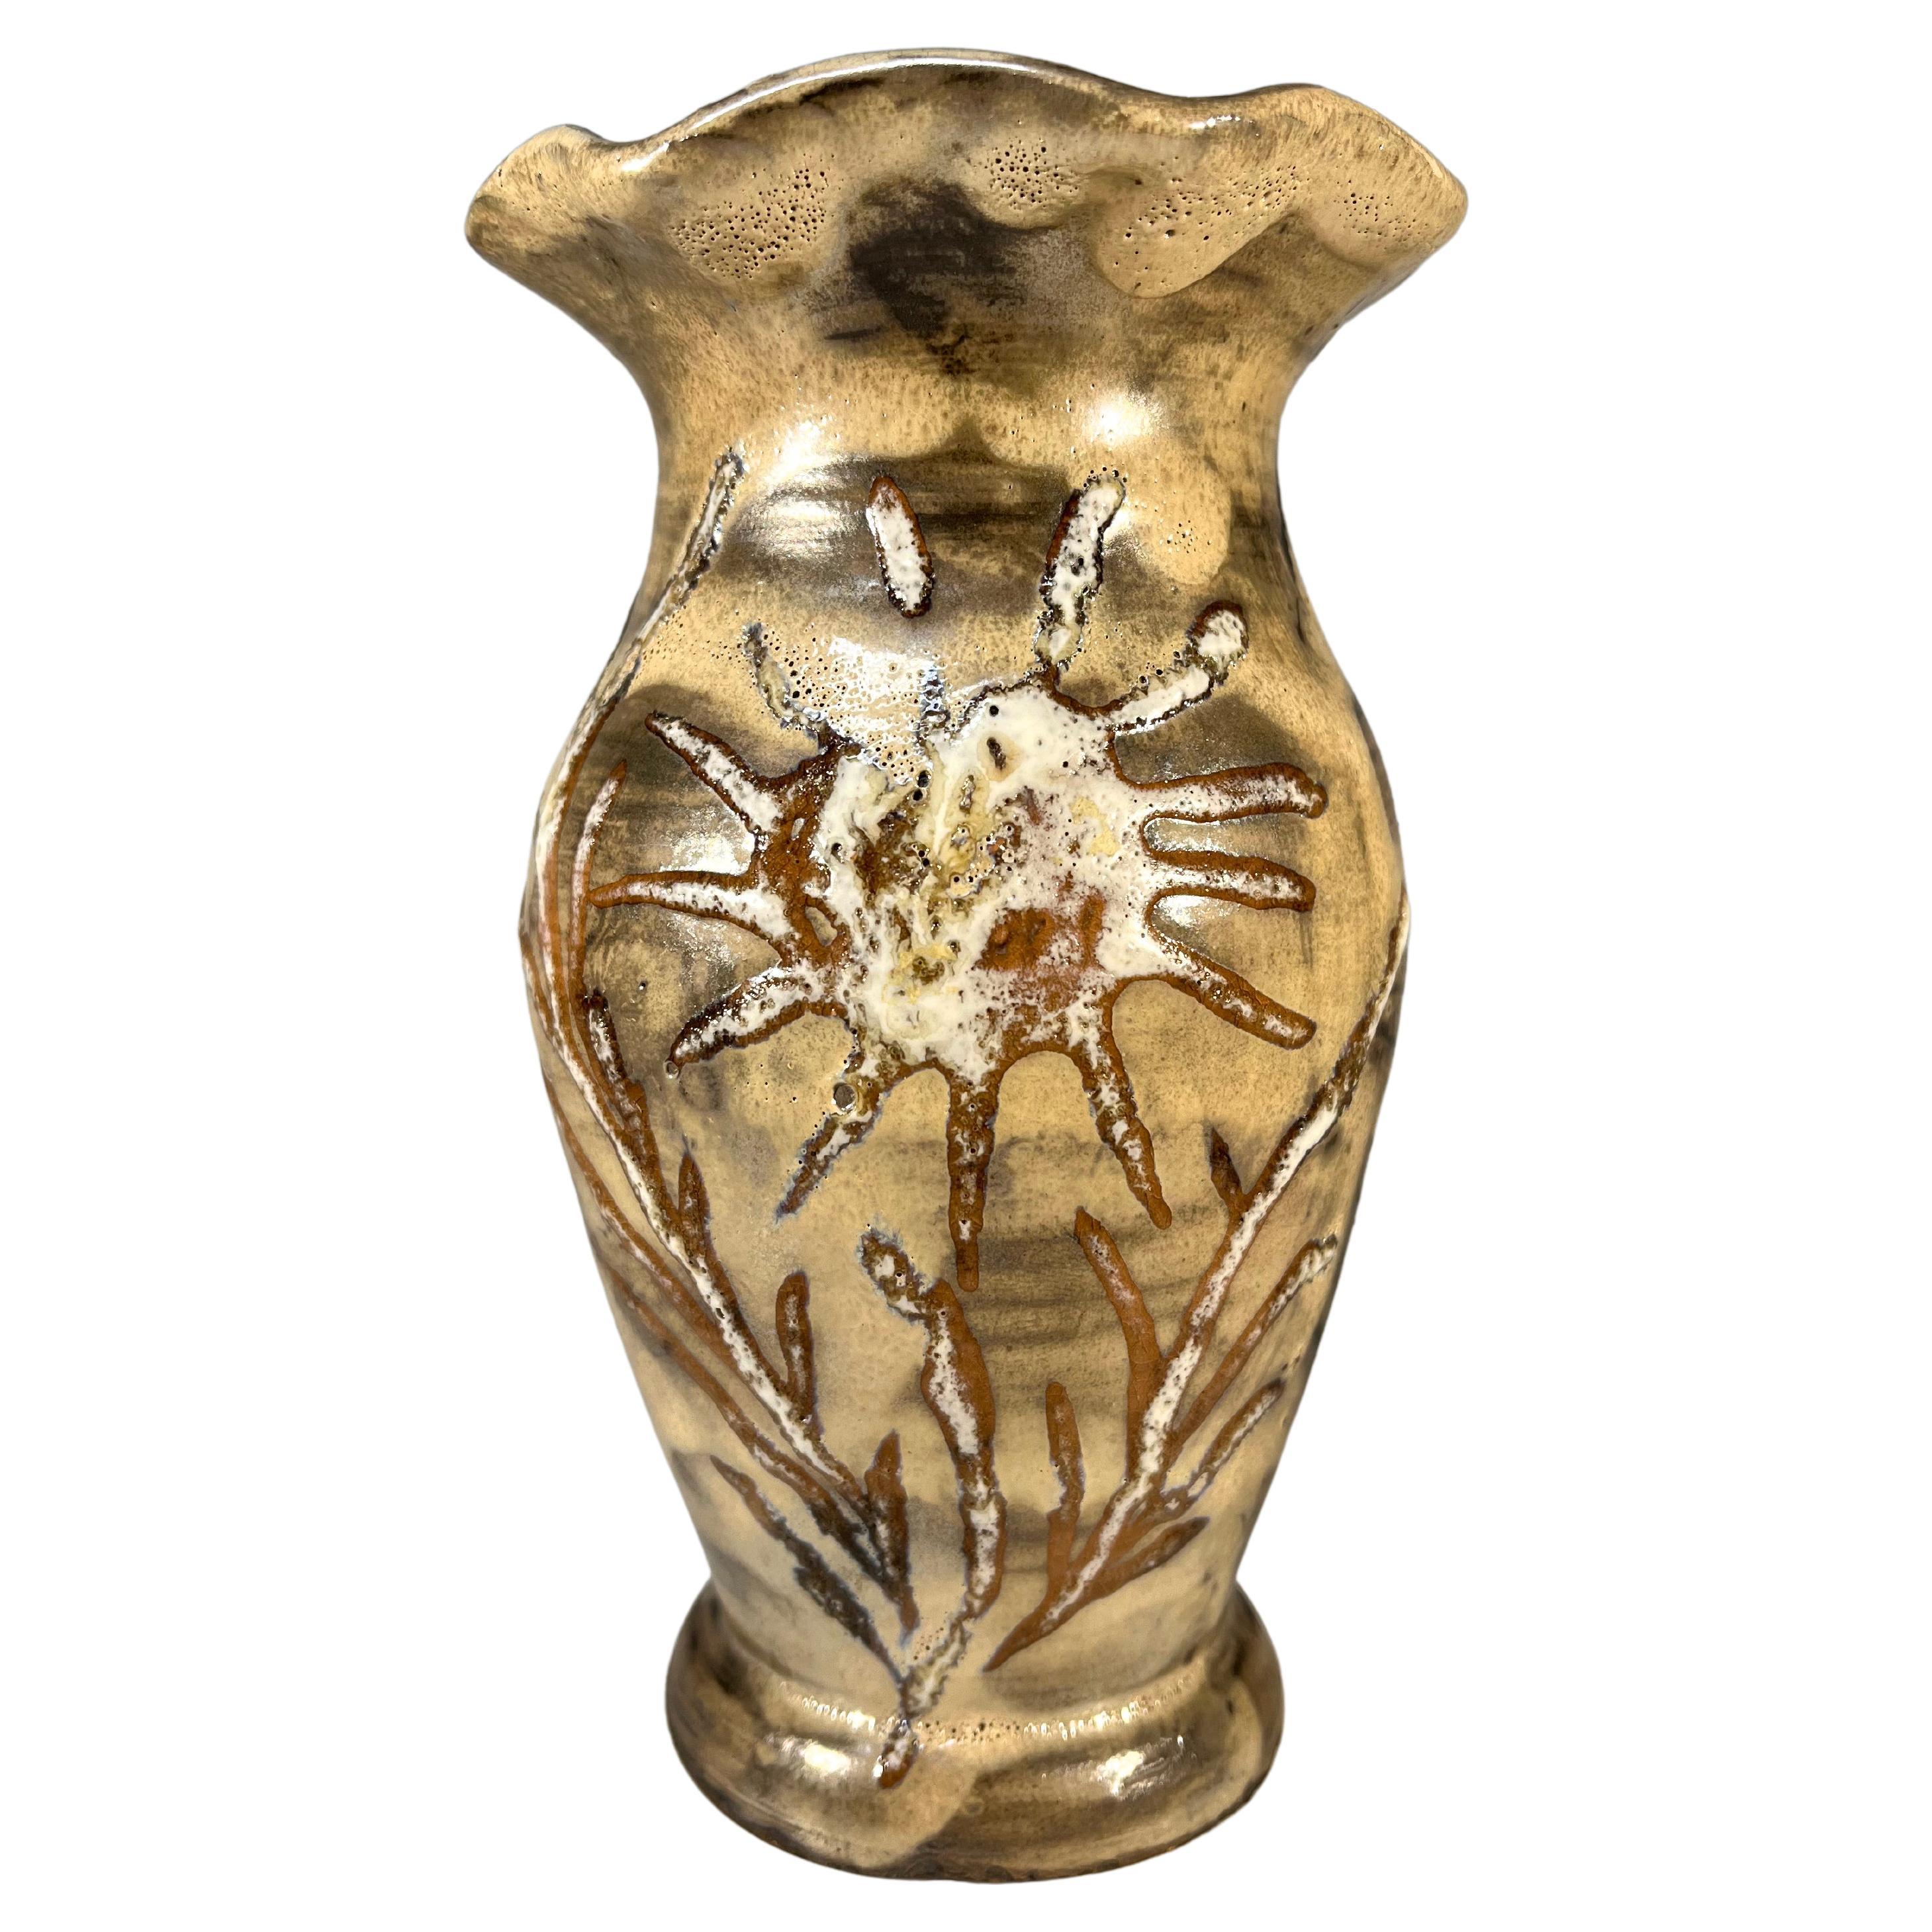 Abstract Sunflower Studio Vase From Vallauris, France - Applied Lustre Glaze 